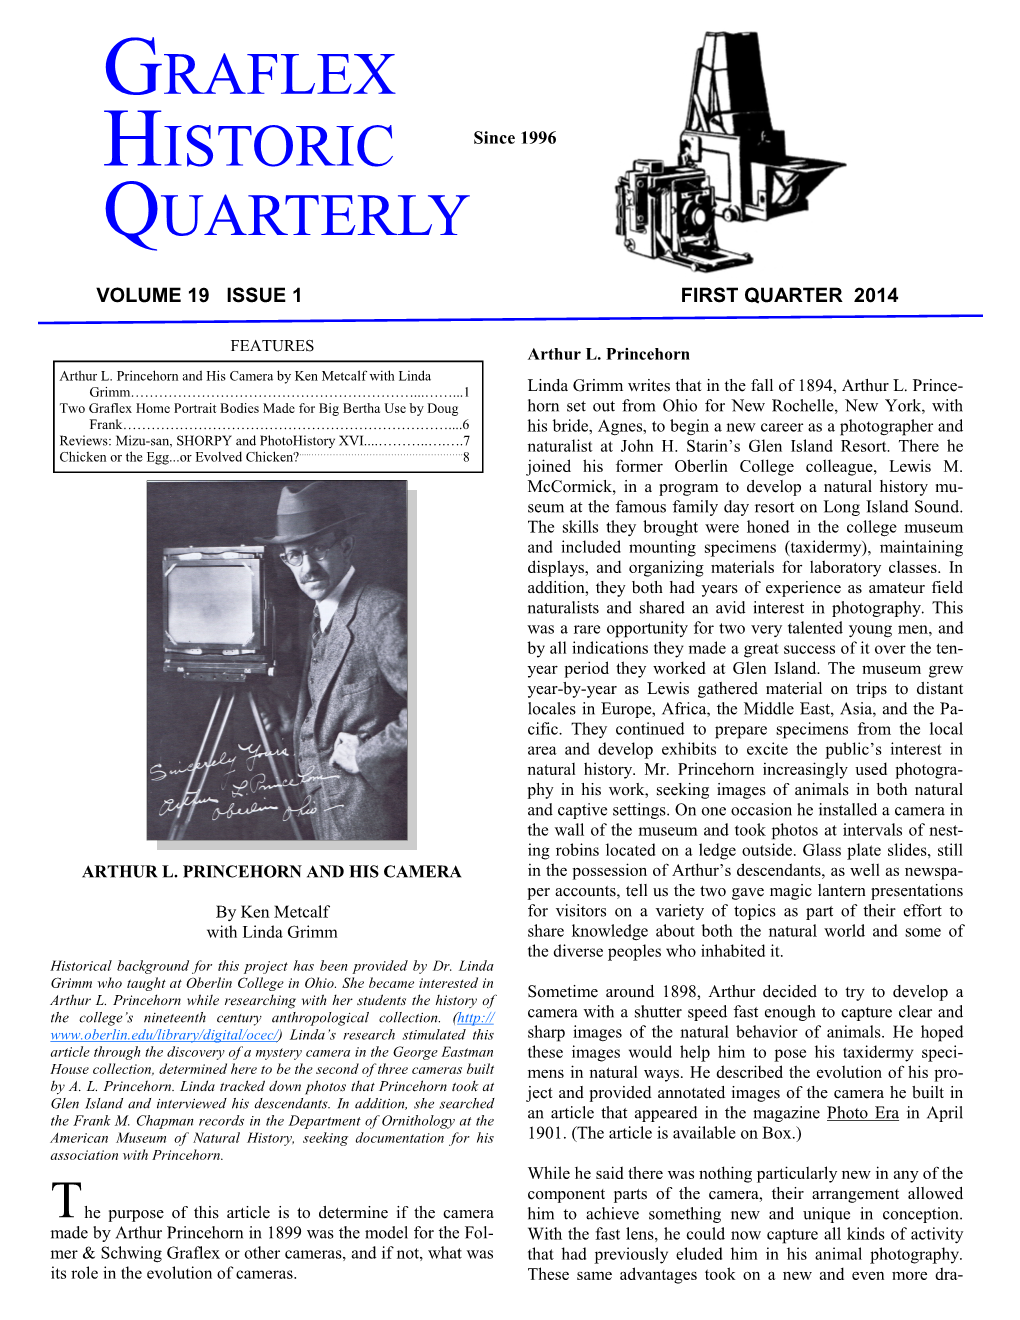 Graflex Historic Quarterly the Quarterly Is Dedicated to Enriching the Study of the Graflex Company, Its History, and Products